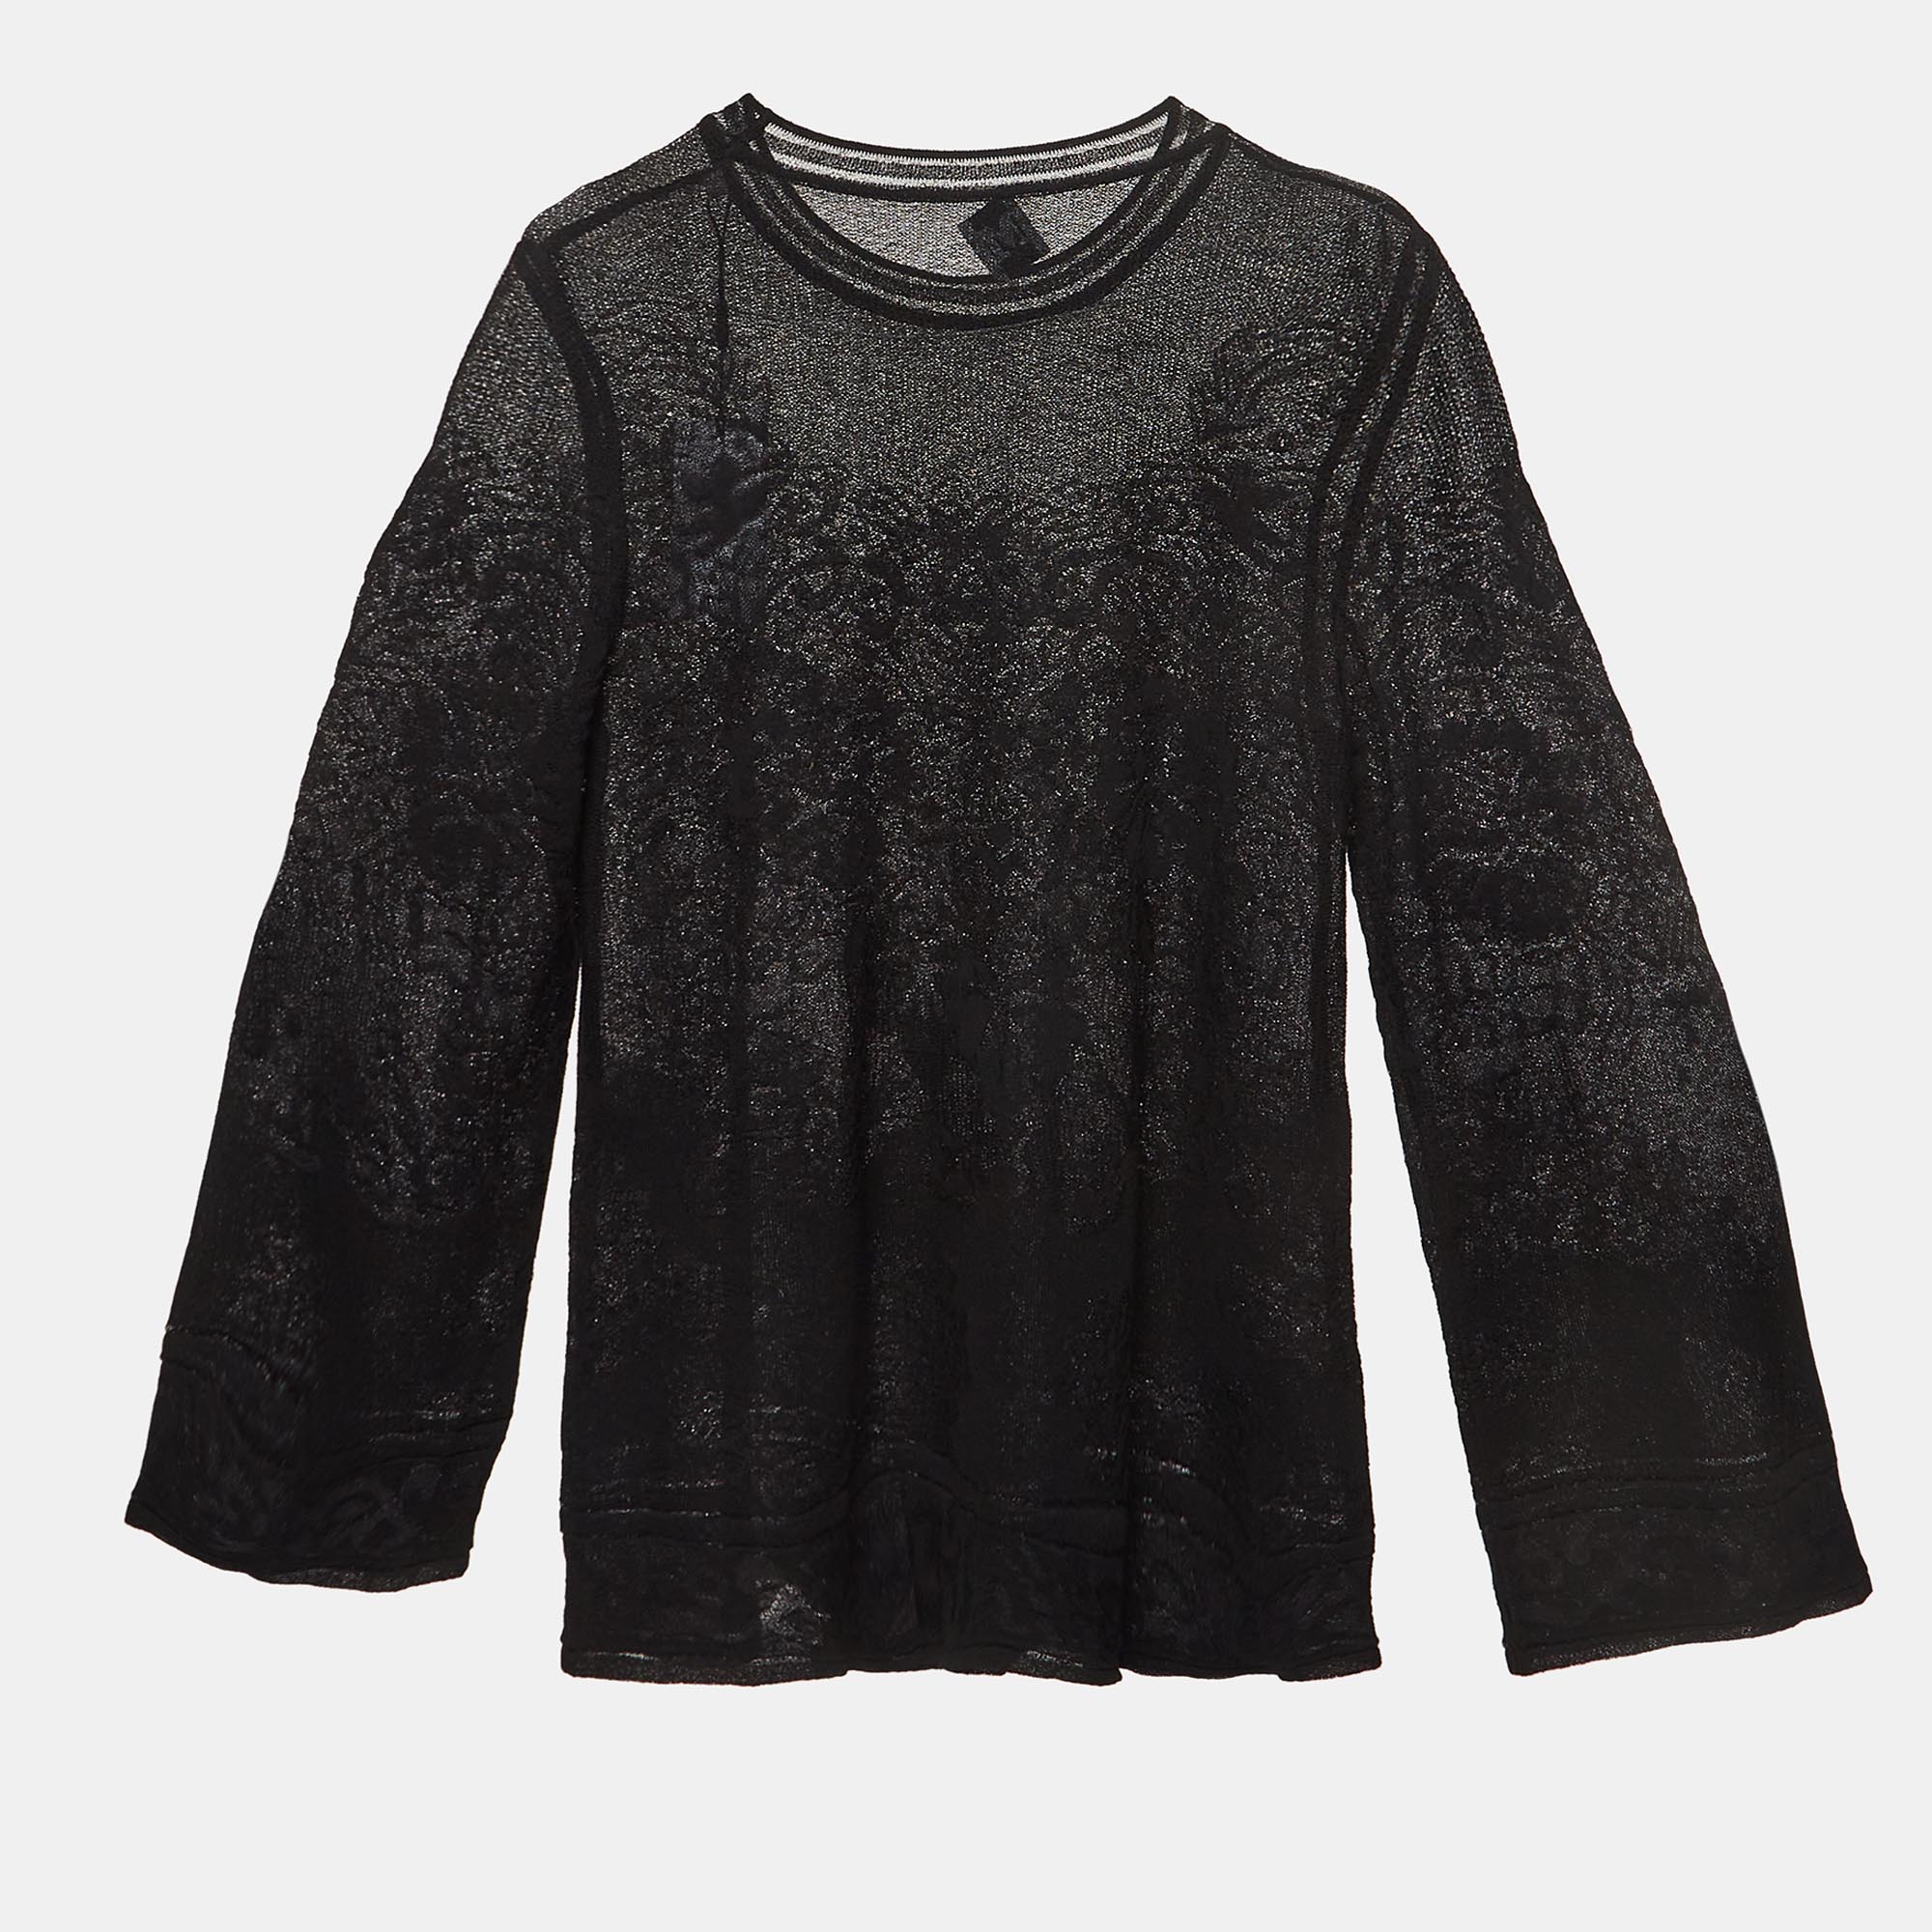 Pre-owned M Missoni Black Patterned Lace Knit Top M